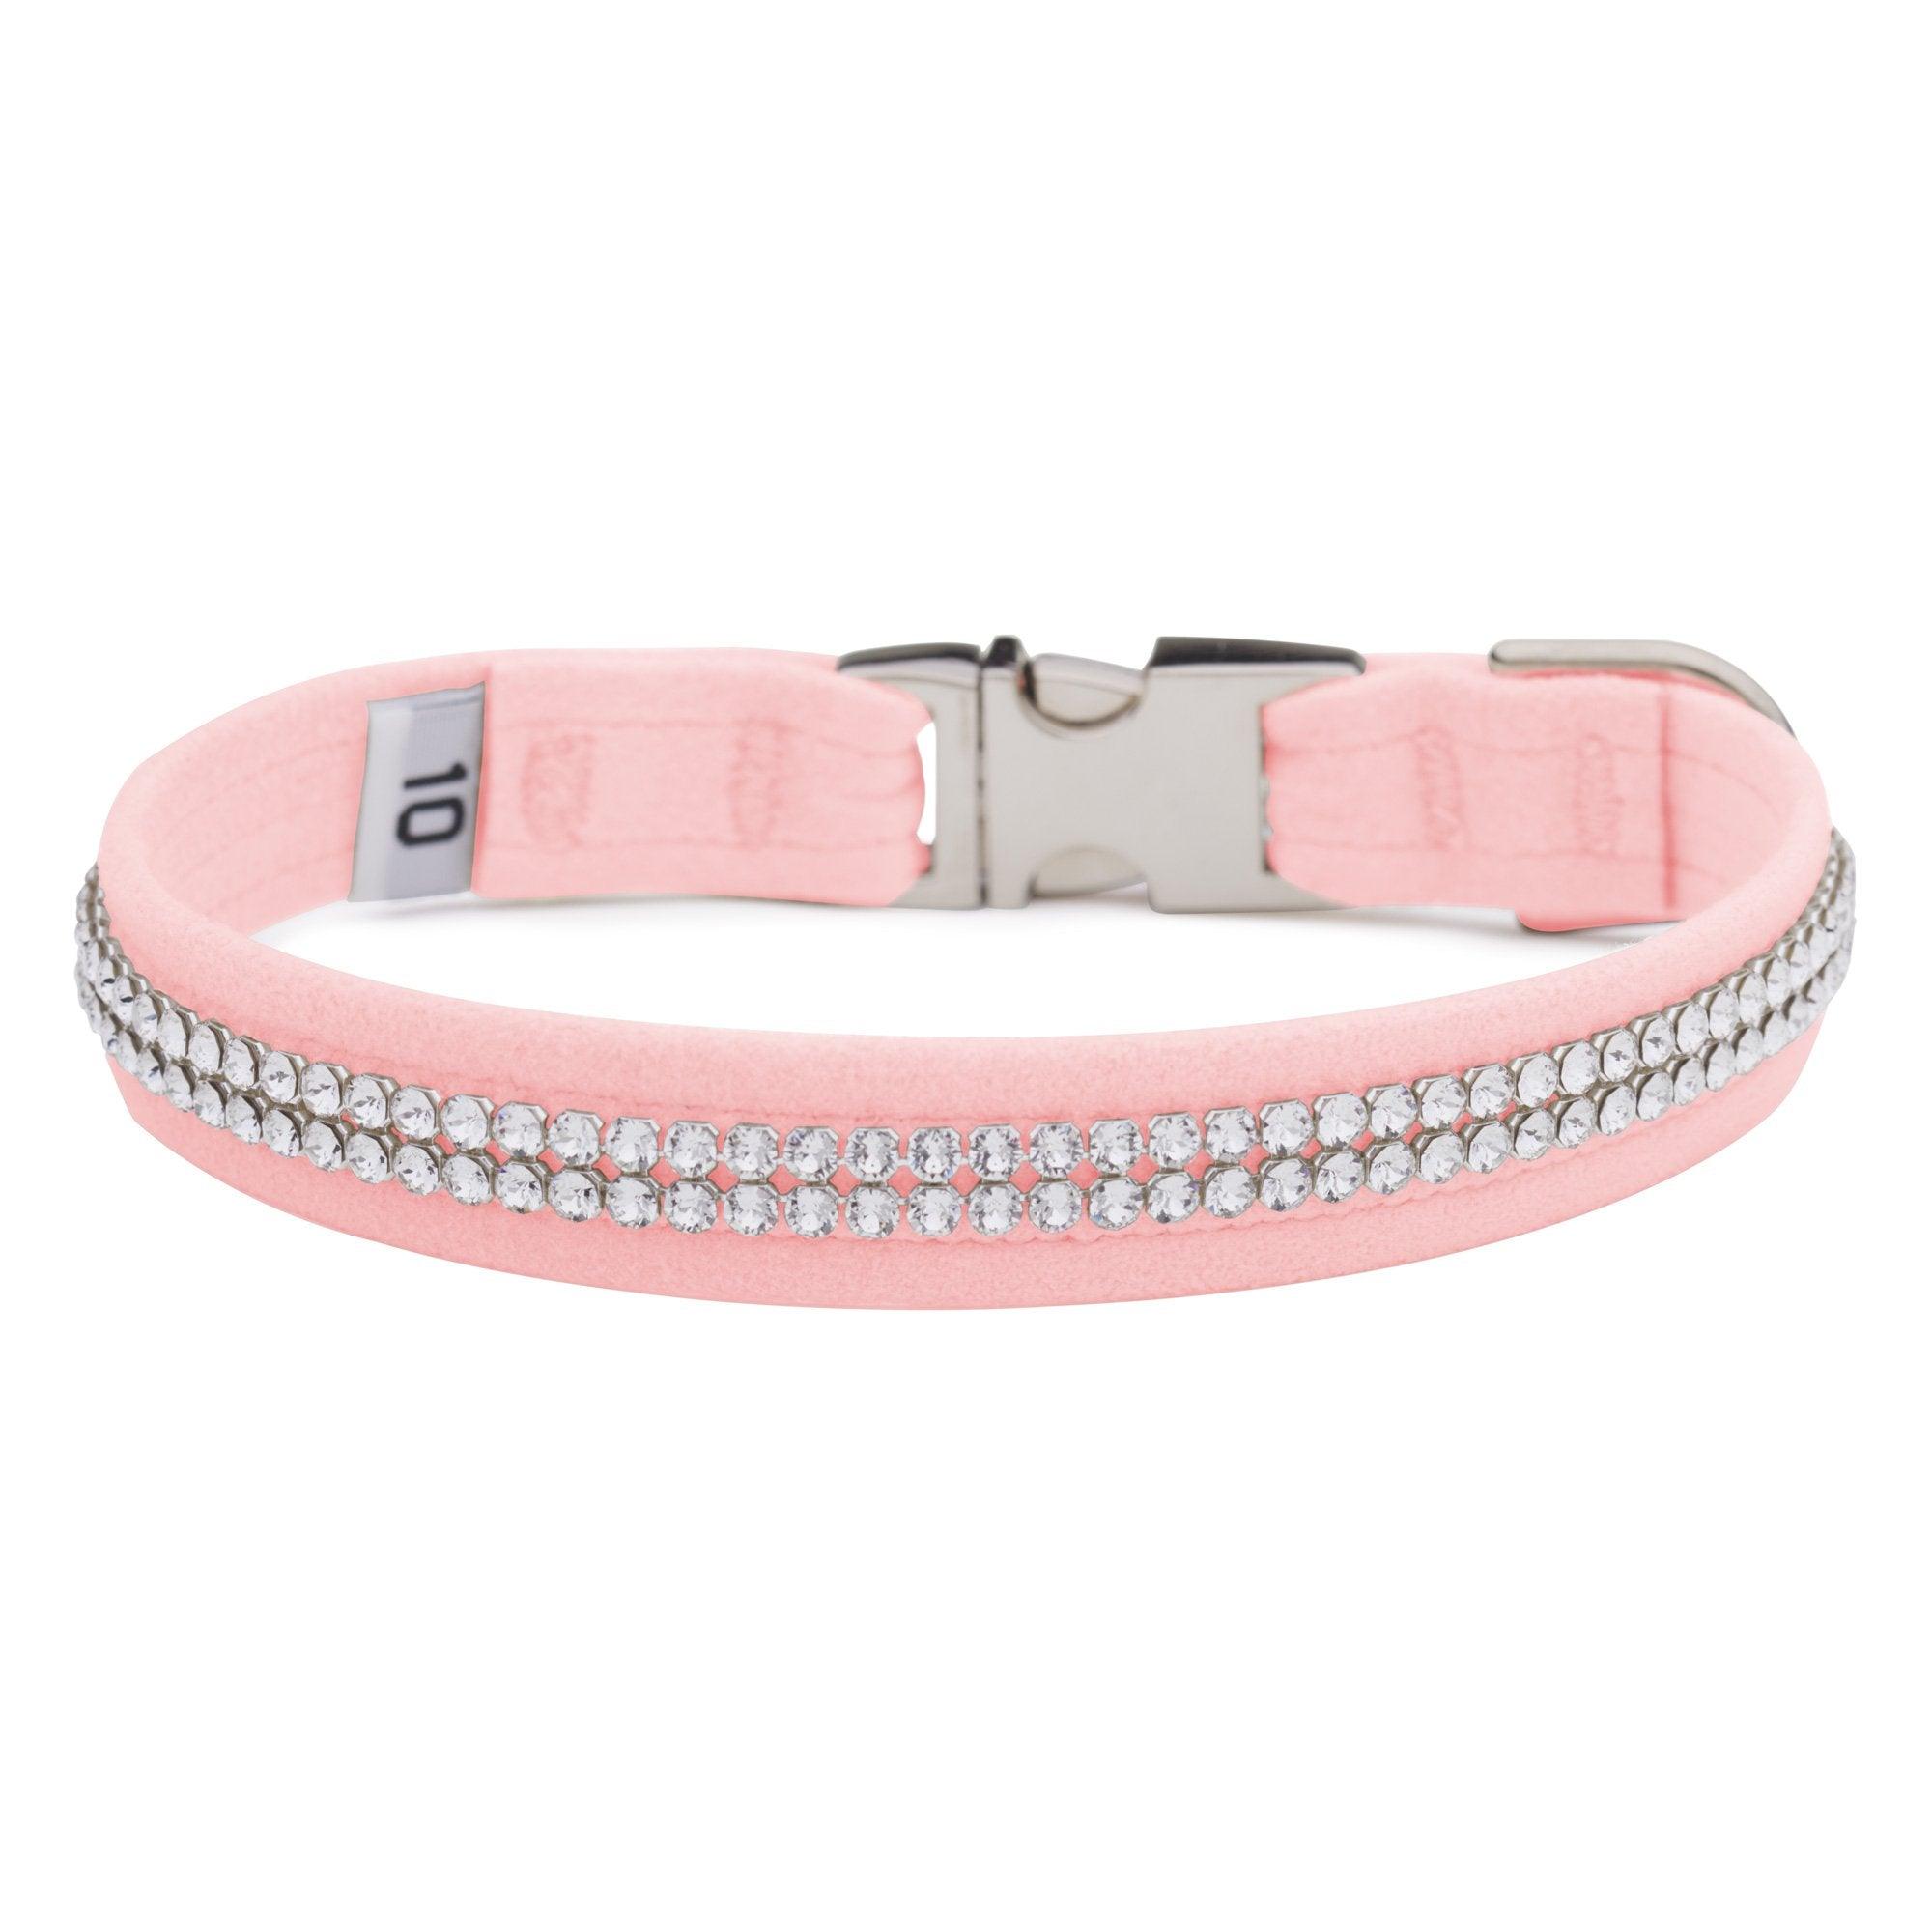 Puppy Pink 2 Row Giltmore Perfect Fit Collar - Rocky & Maggie's Pet Boutique and Salon